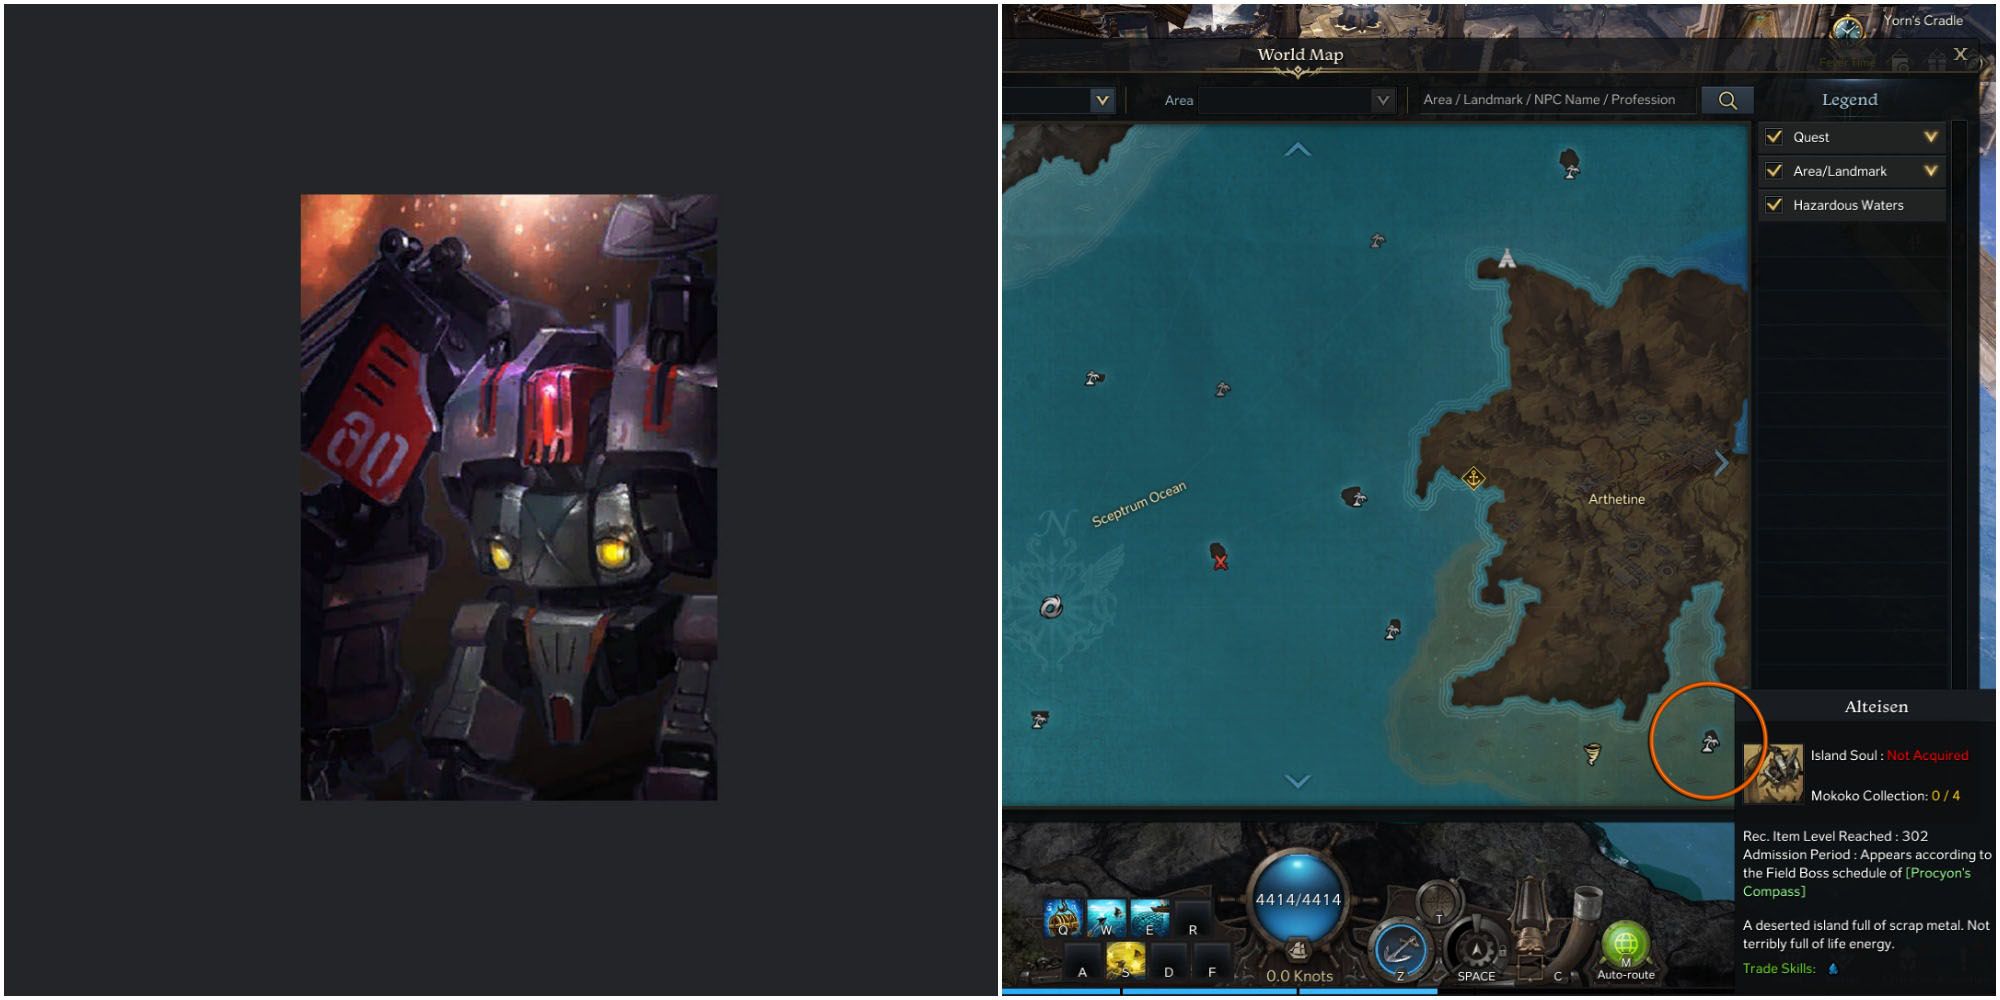 split image of sol grande card and alteisen island location on world map